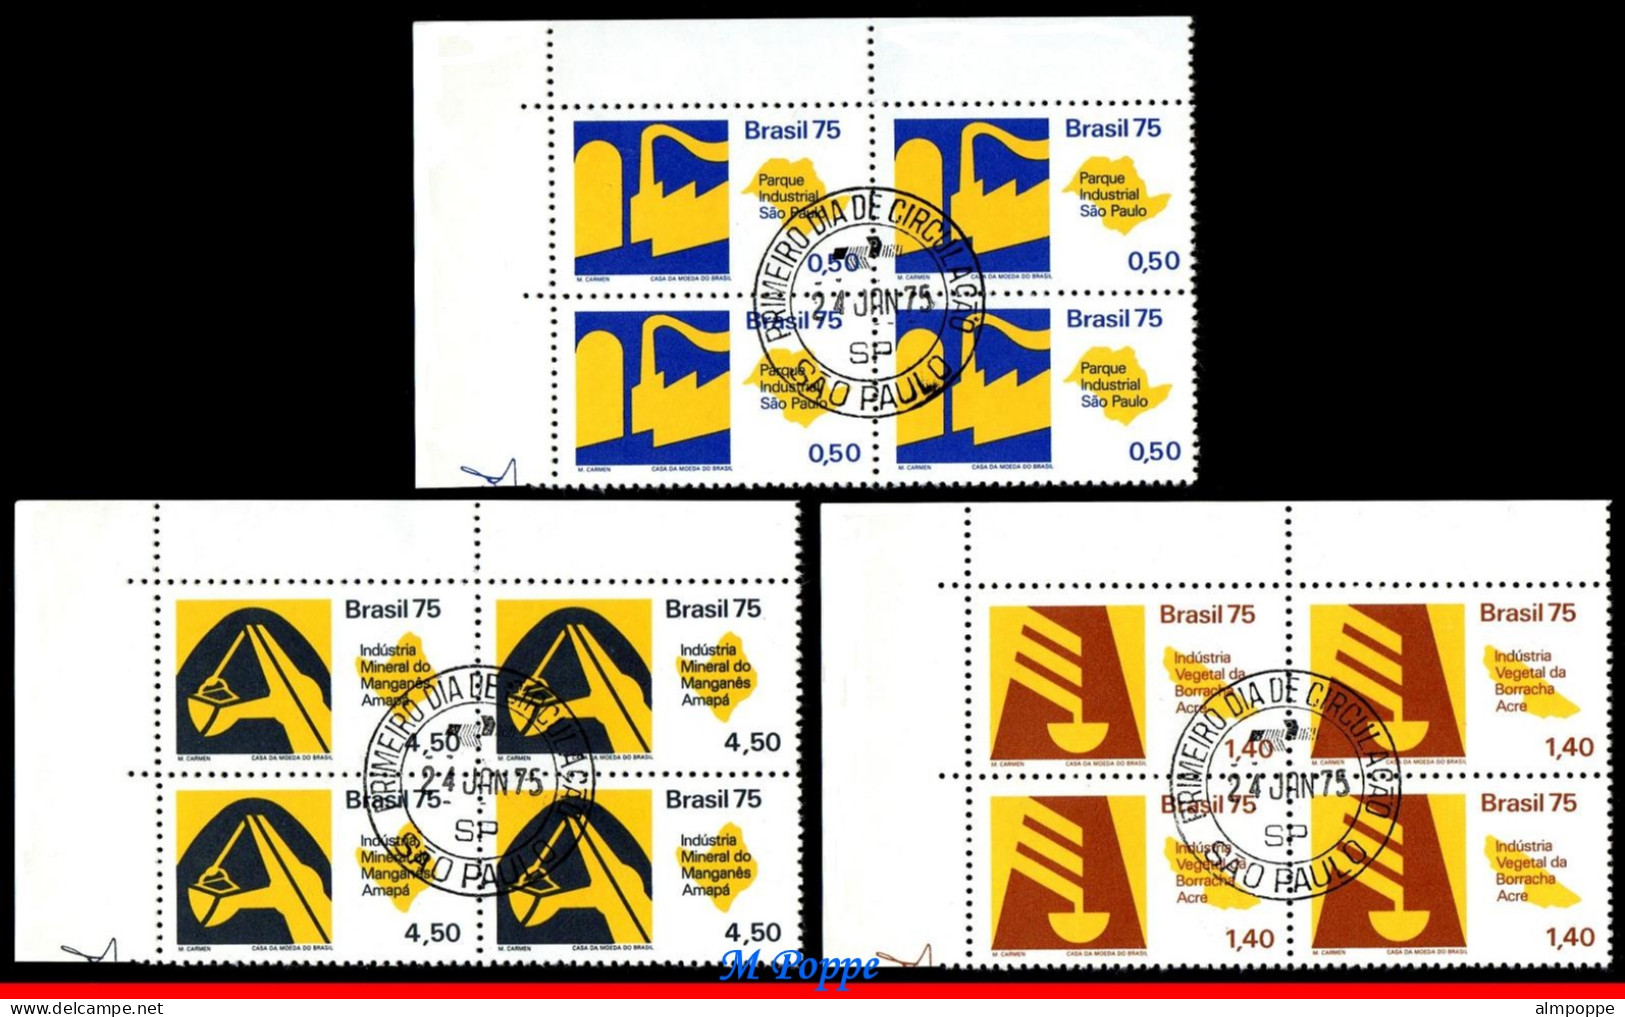 Ref. BR-1376-78-QU BRAZIL 1975 - ECONOMIC DEVELOPMENT,BLOCKS CANCELED 1ST DAY WITH GLUE NH, INDUSTRY 12V Sc# 1376-1378 - Used Stamps